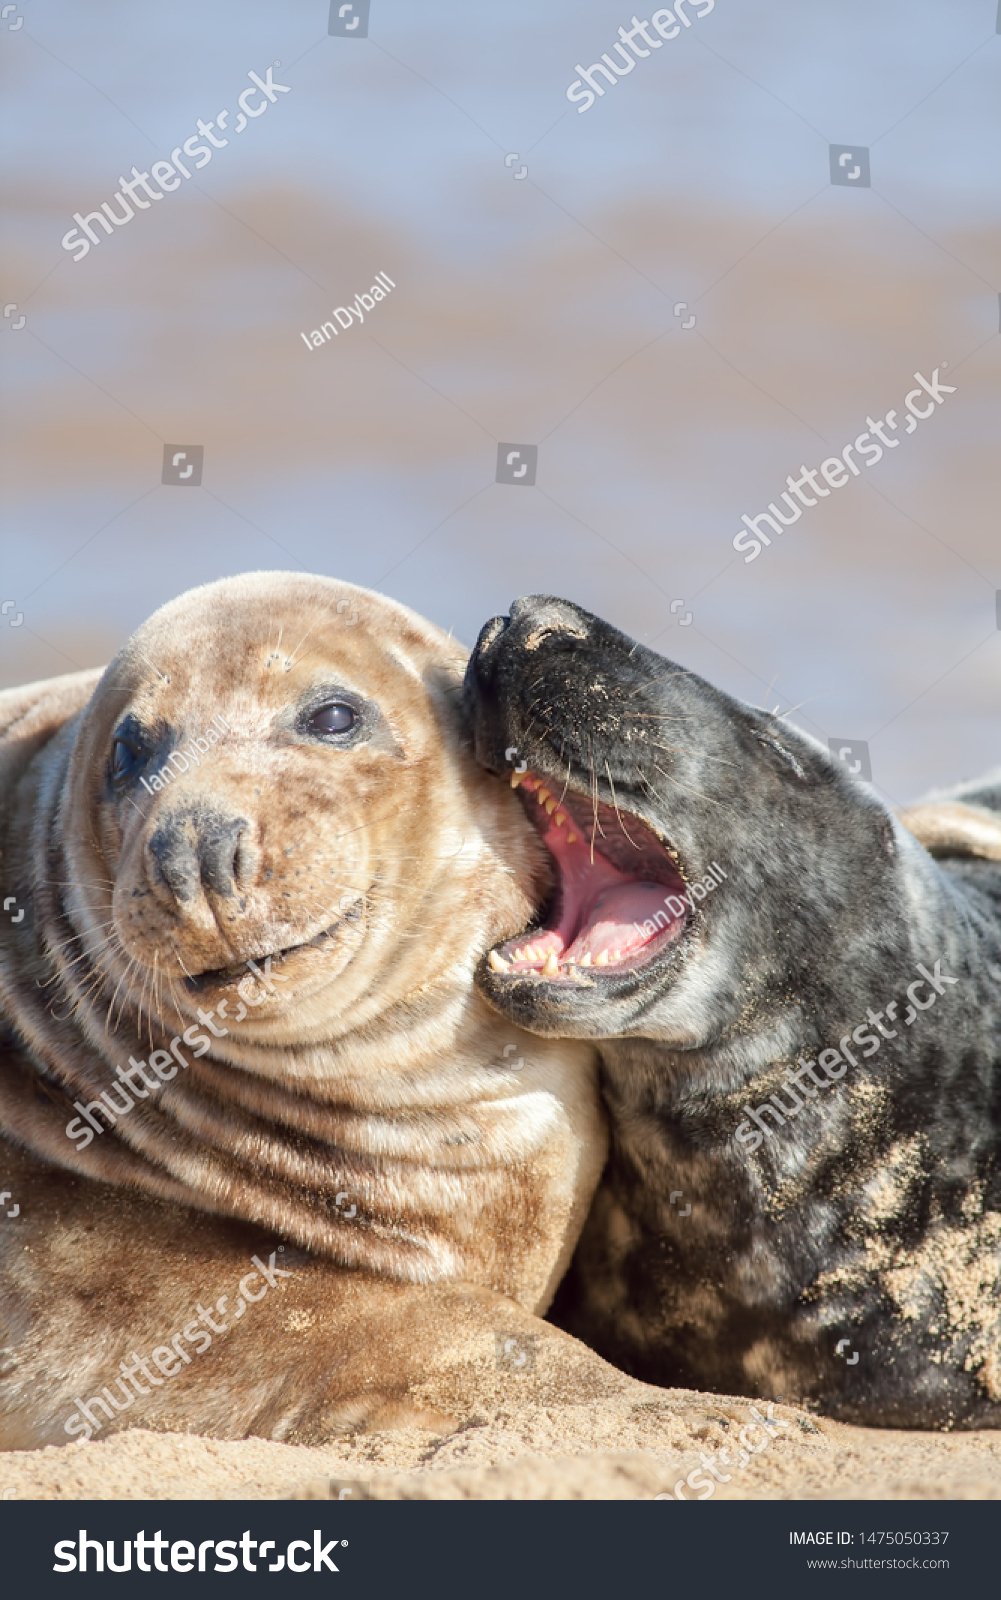 Girlfriend seal and Seal dating